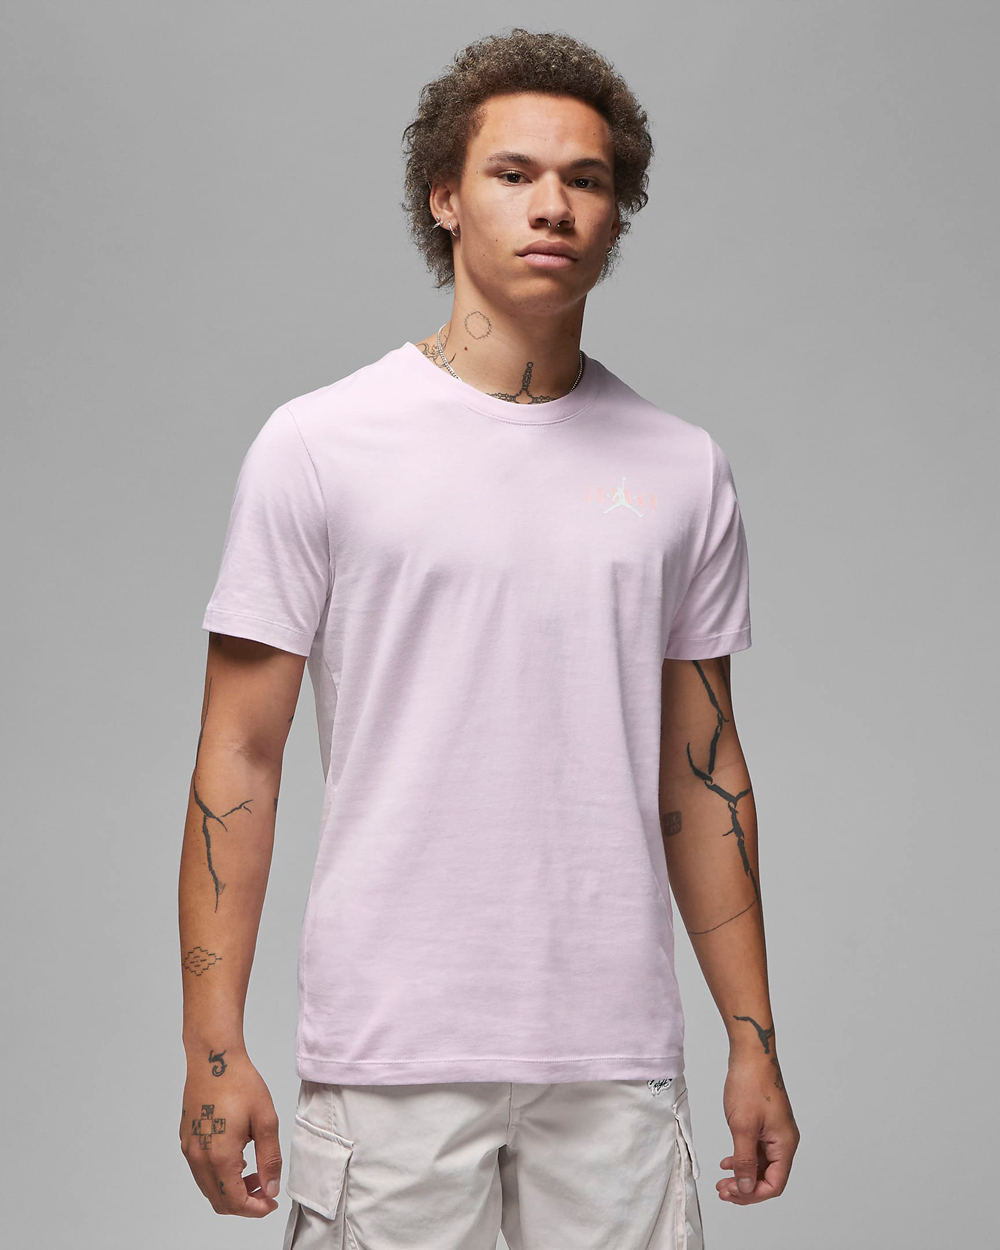 Jordan Iced Lilac Shirts Clothing Sneaker Match Outfits